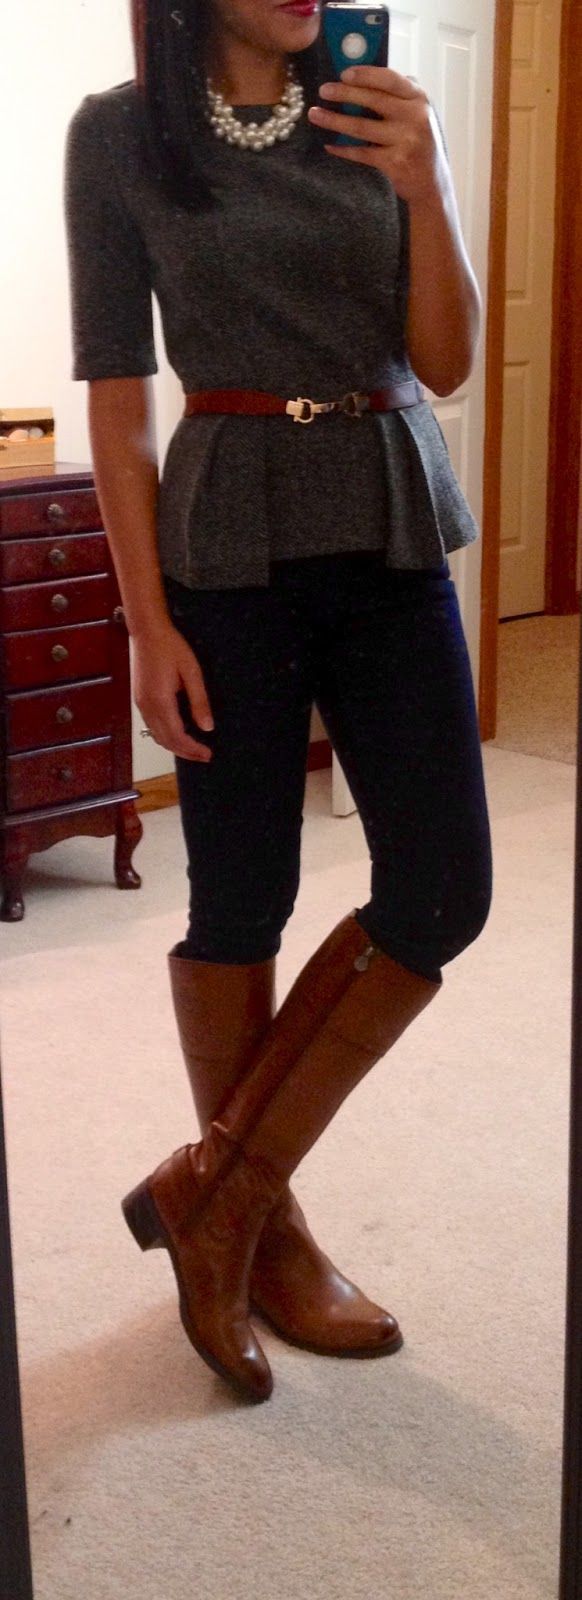 tweed peplum shell, skinny jeans, riding boots